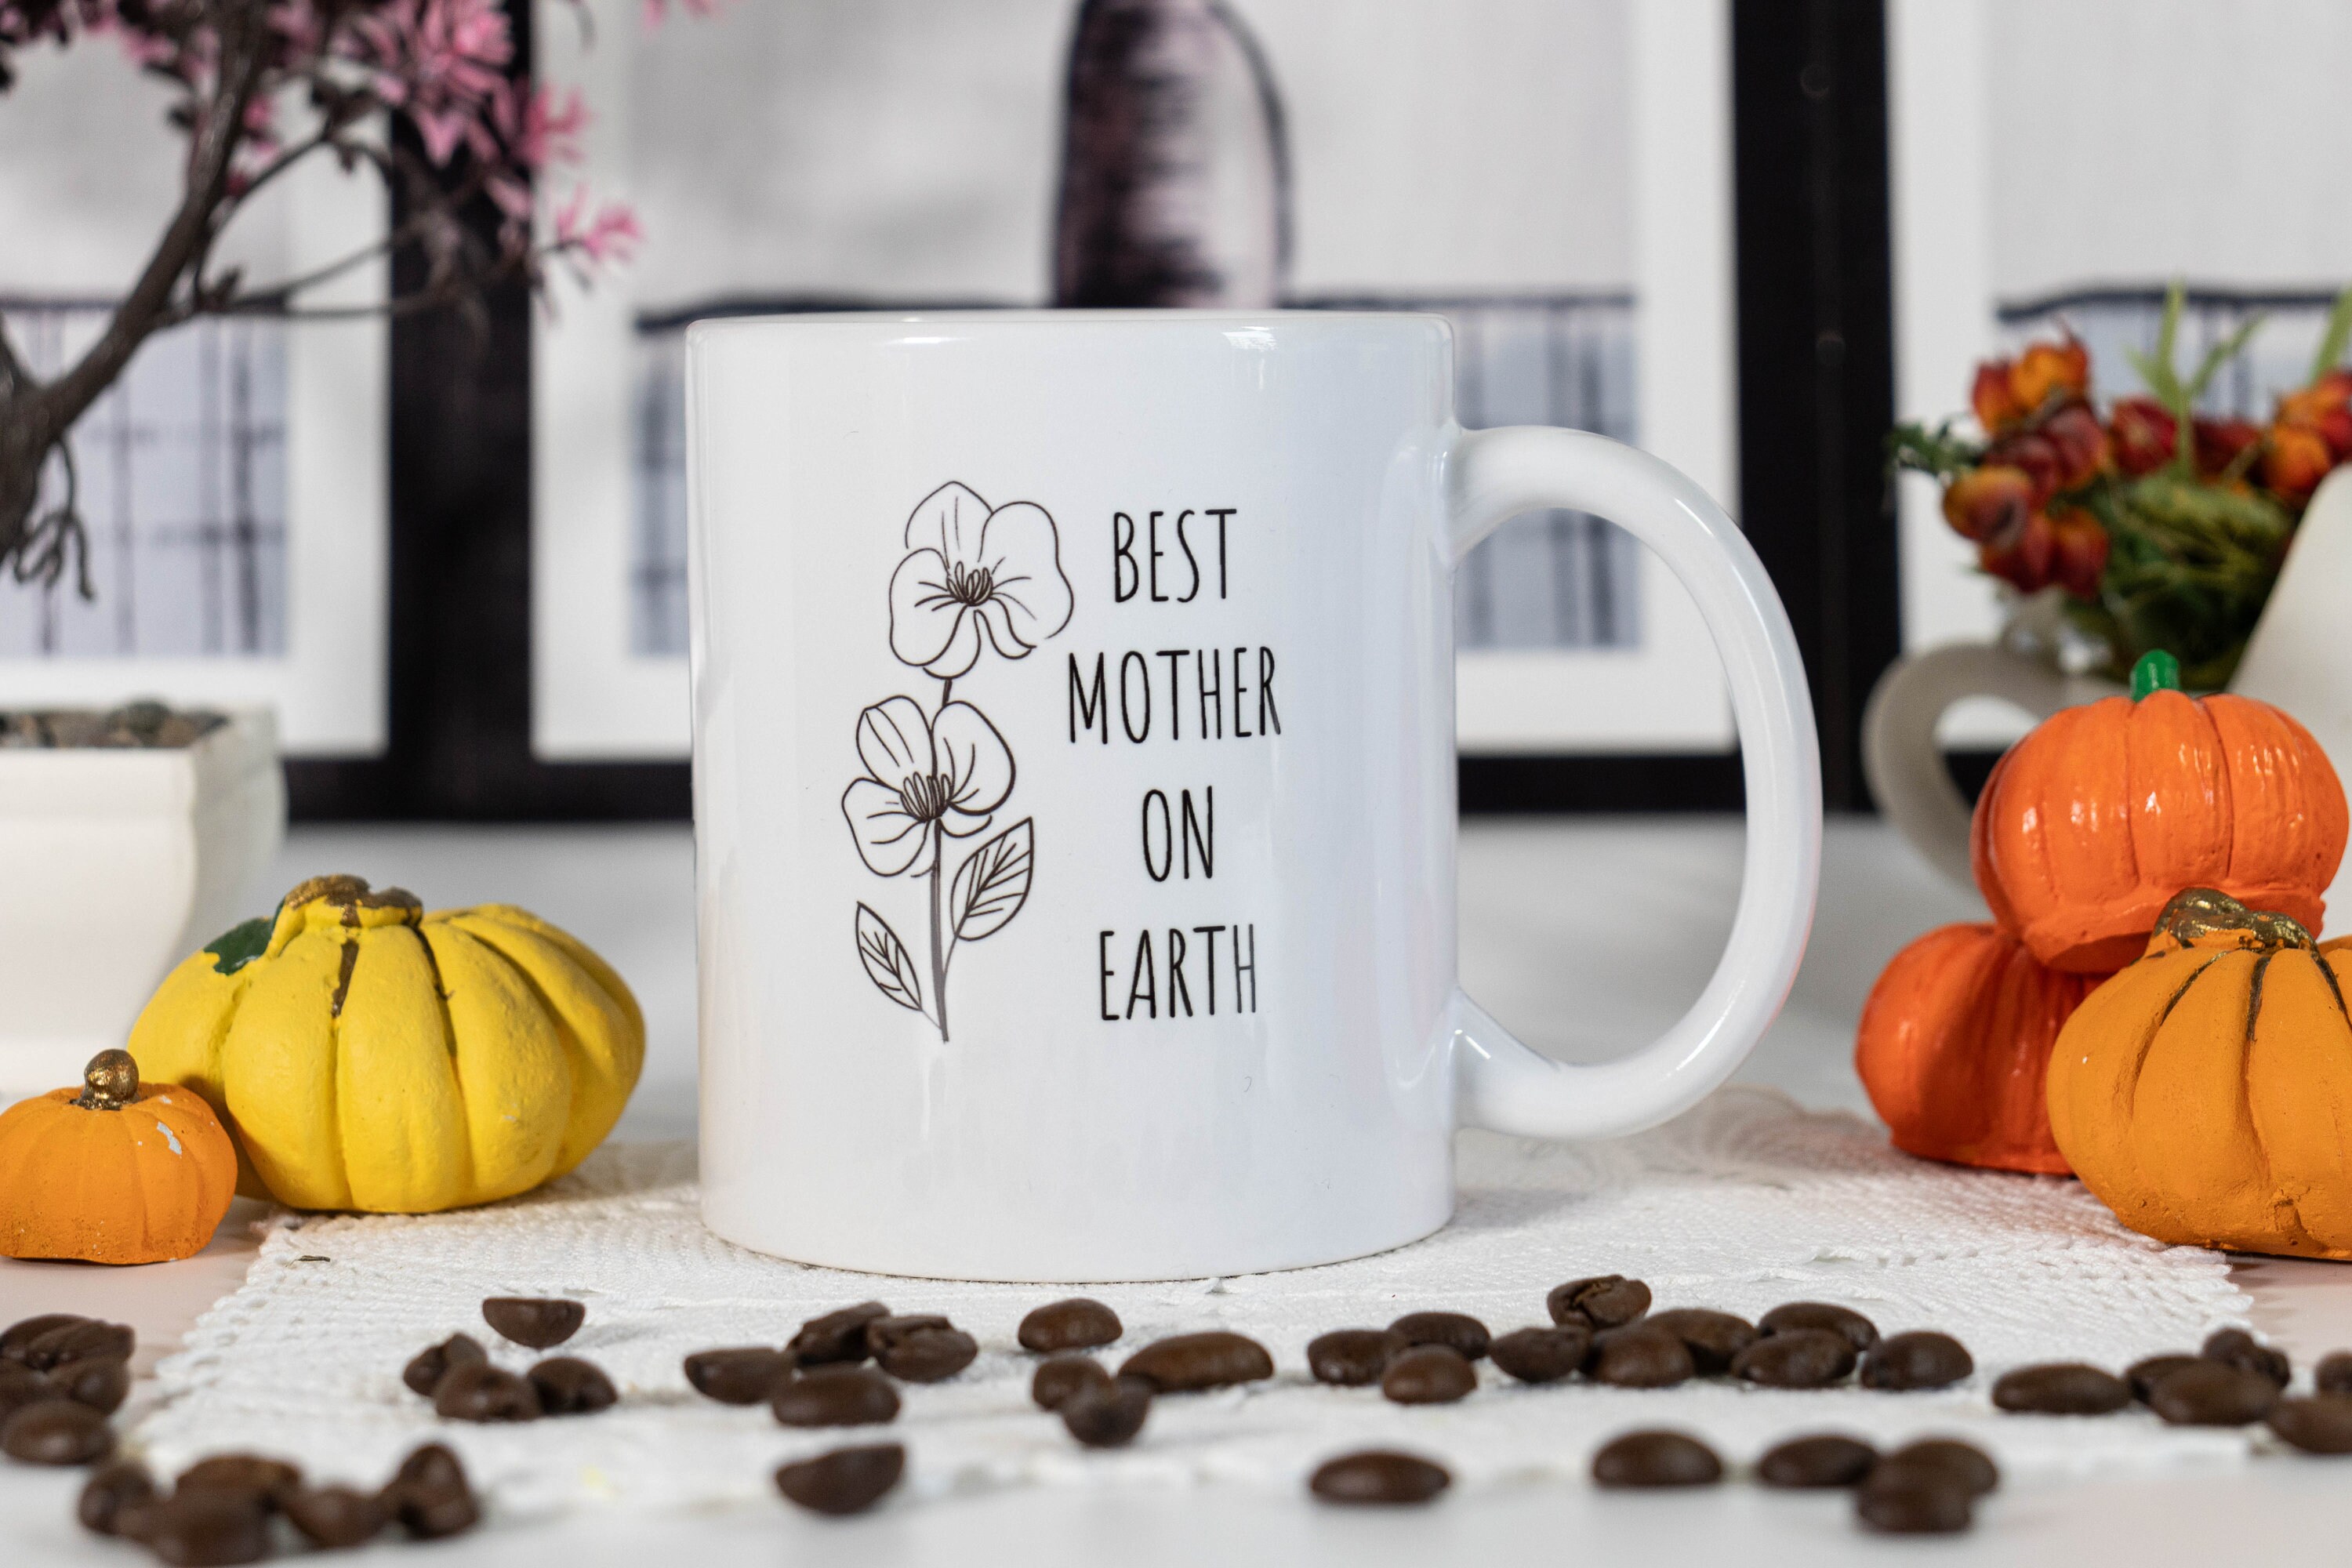 BEST MOTHER on EARTH! - Coffee Mug for Mother's day